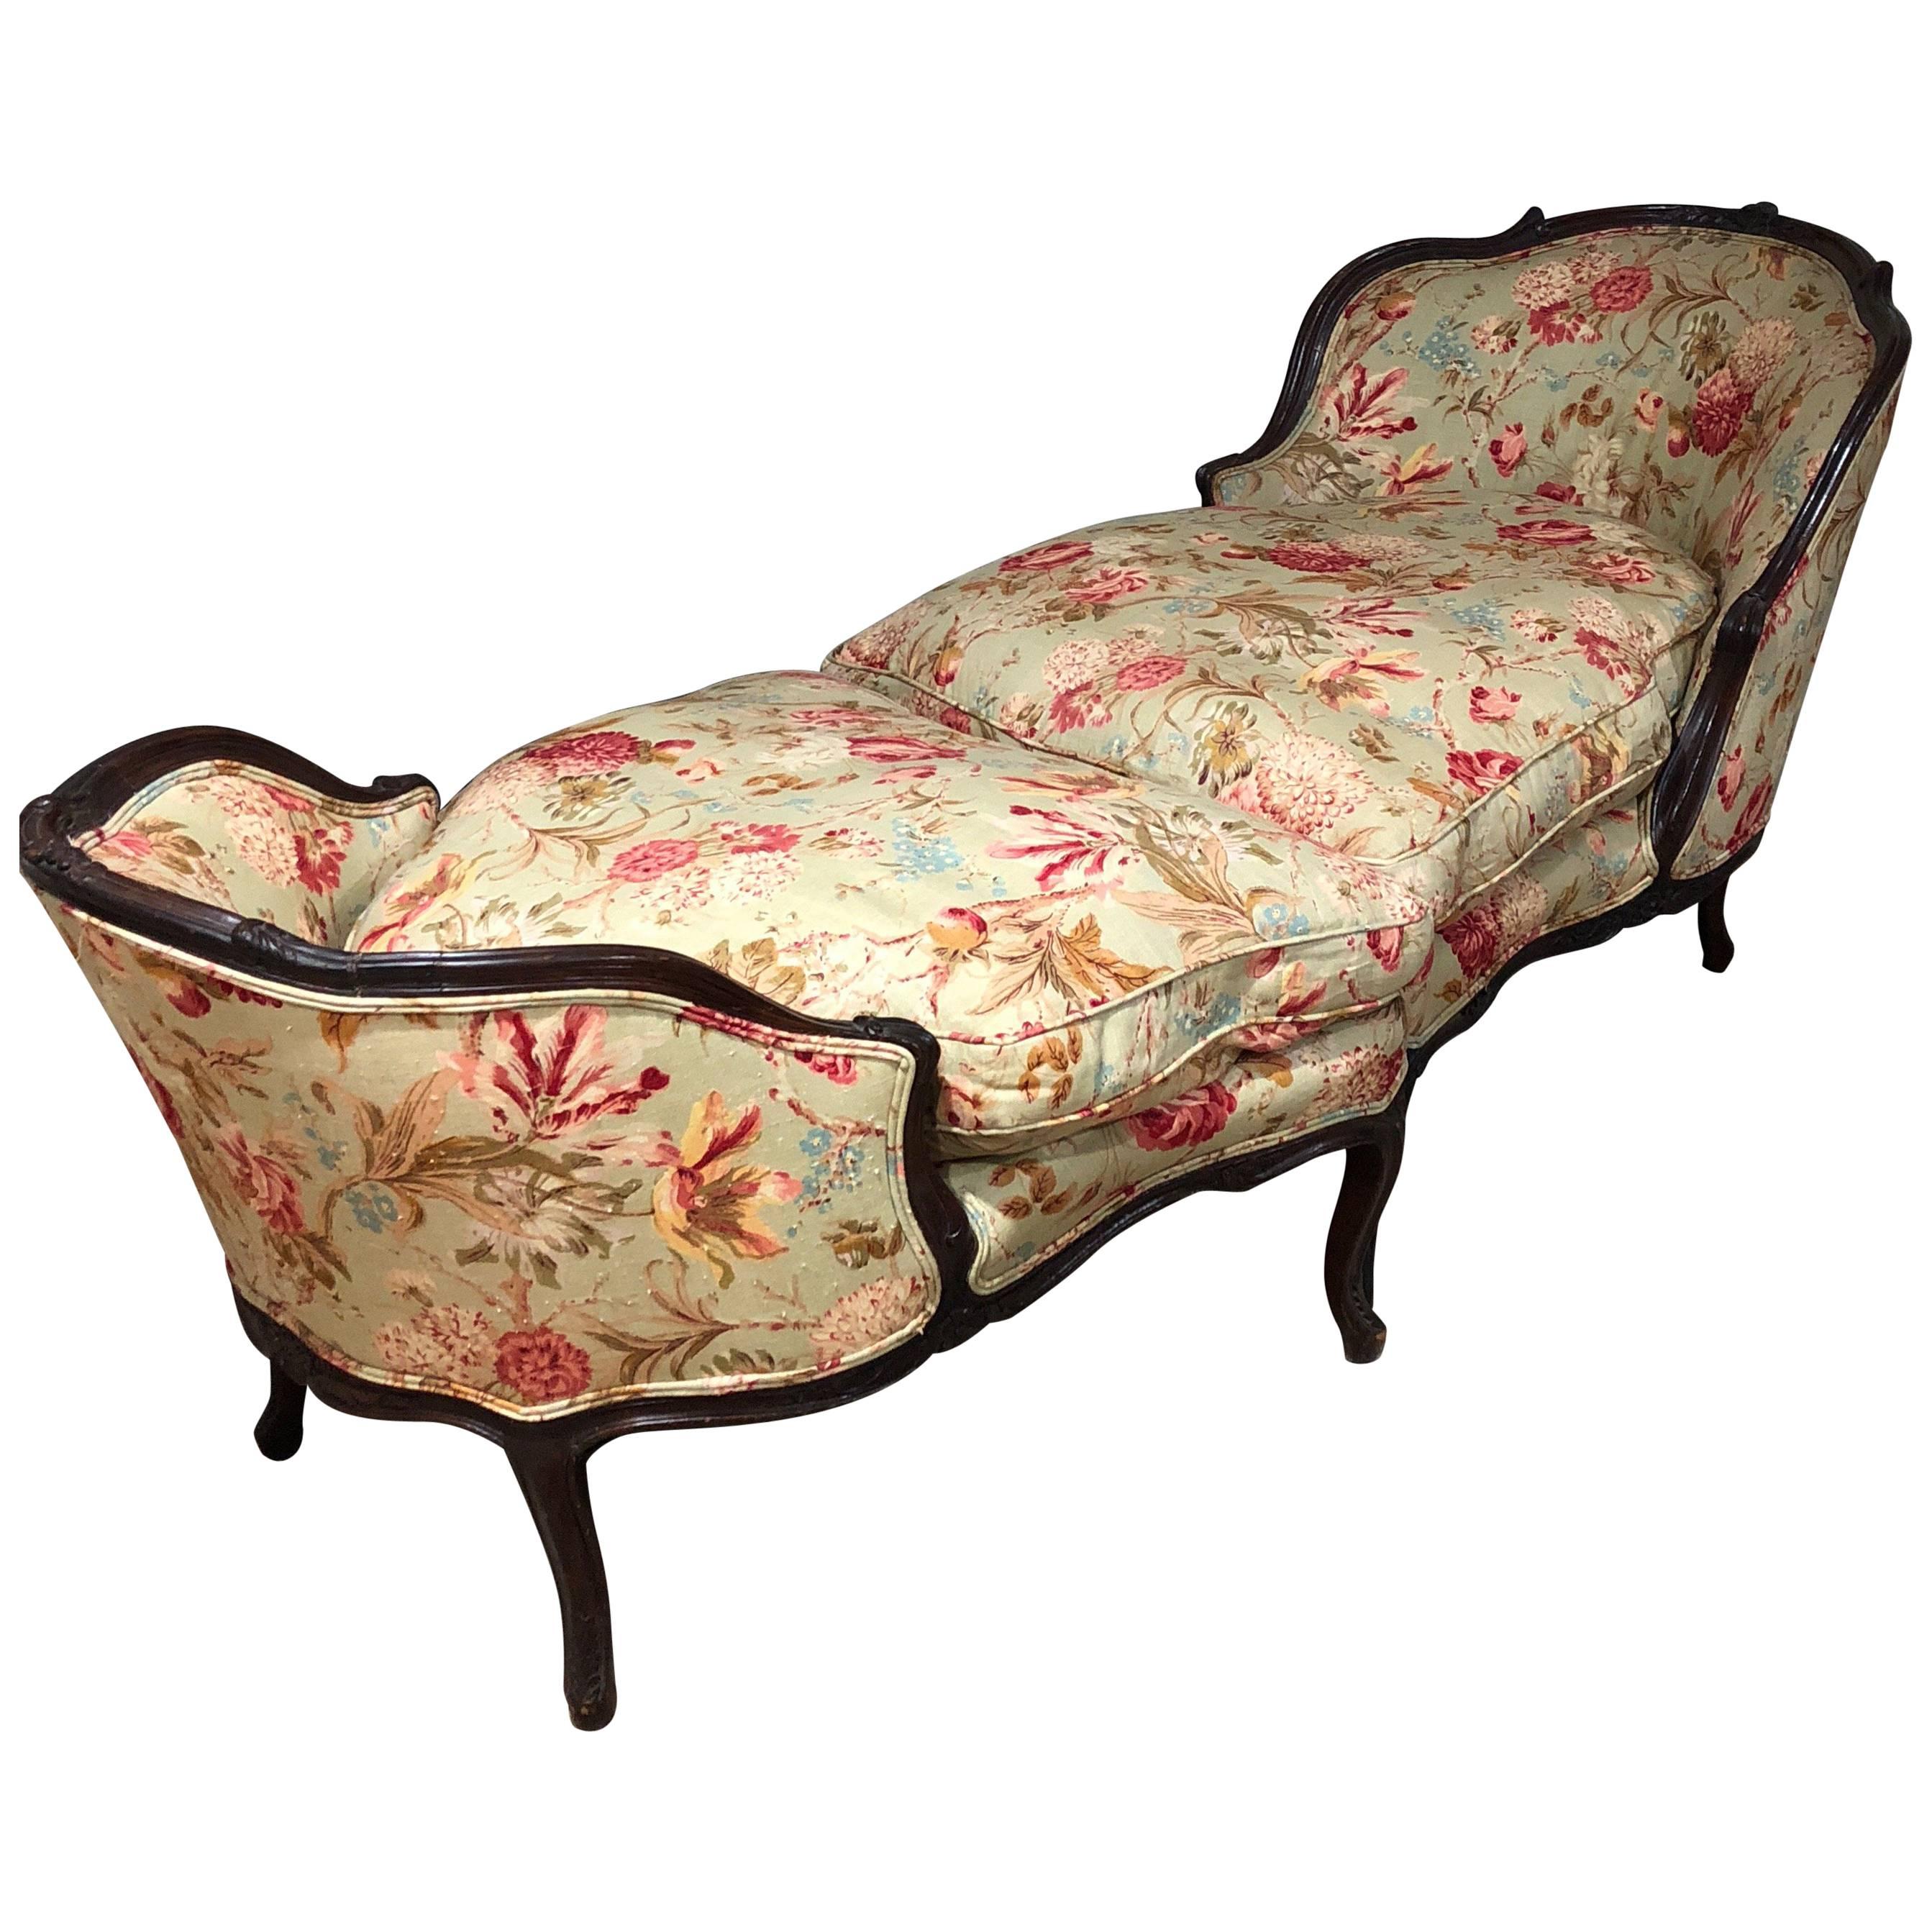 French 18th Century Du Chaise Brisee in Walnut